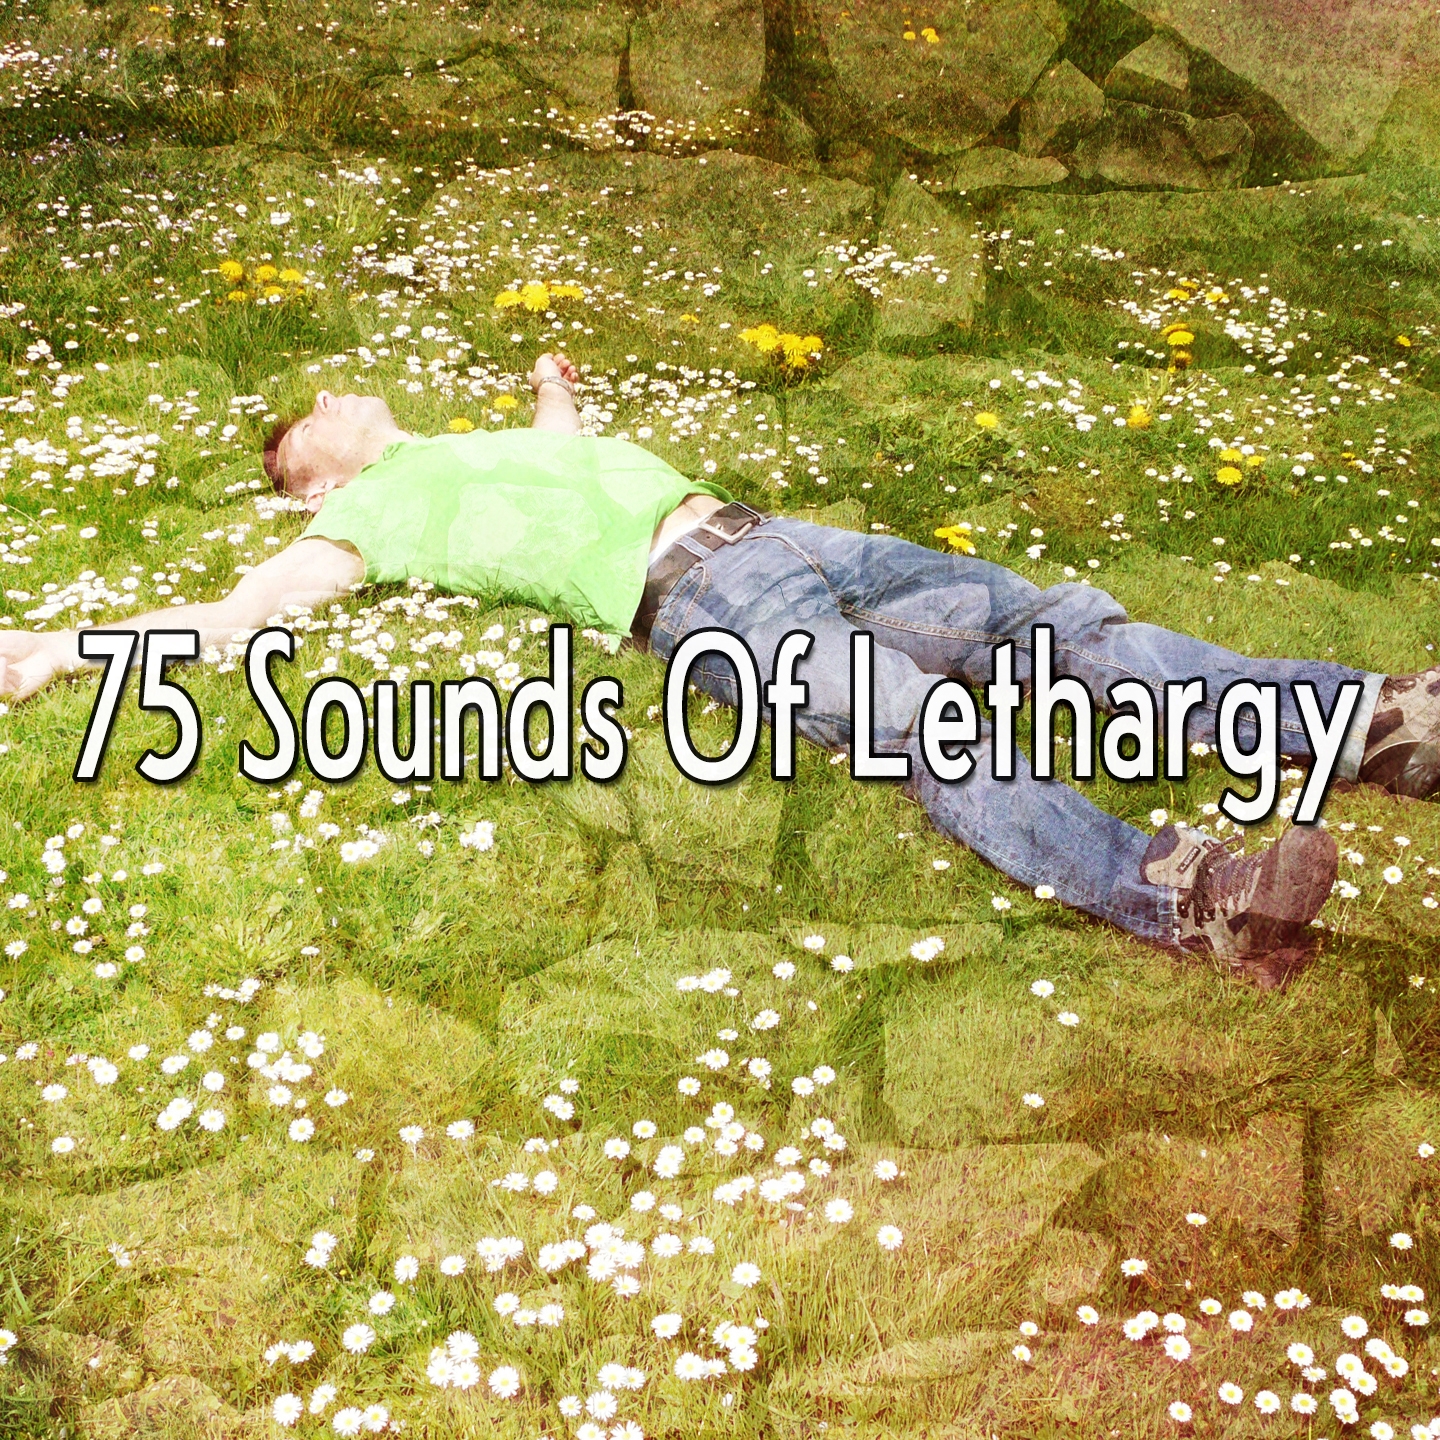 75 Sounds Of Lethargy